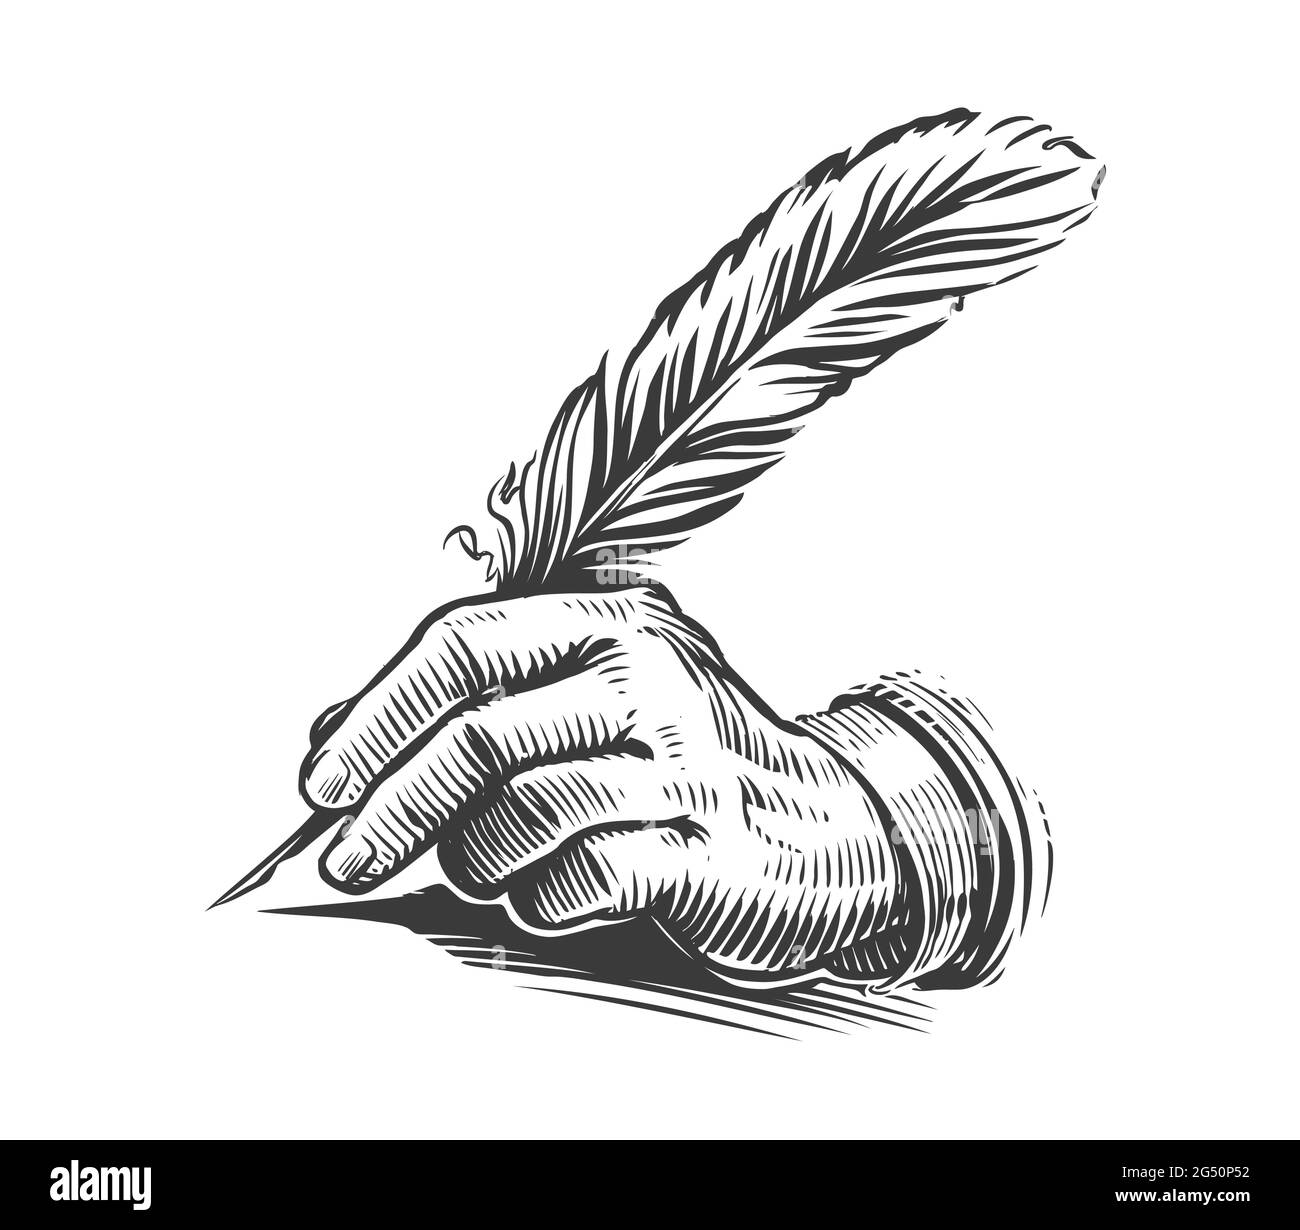 Hand writing with a feather. Illustration drawn in vintage engraving style Stock Vector